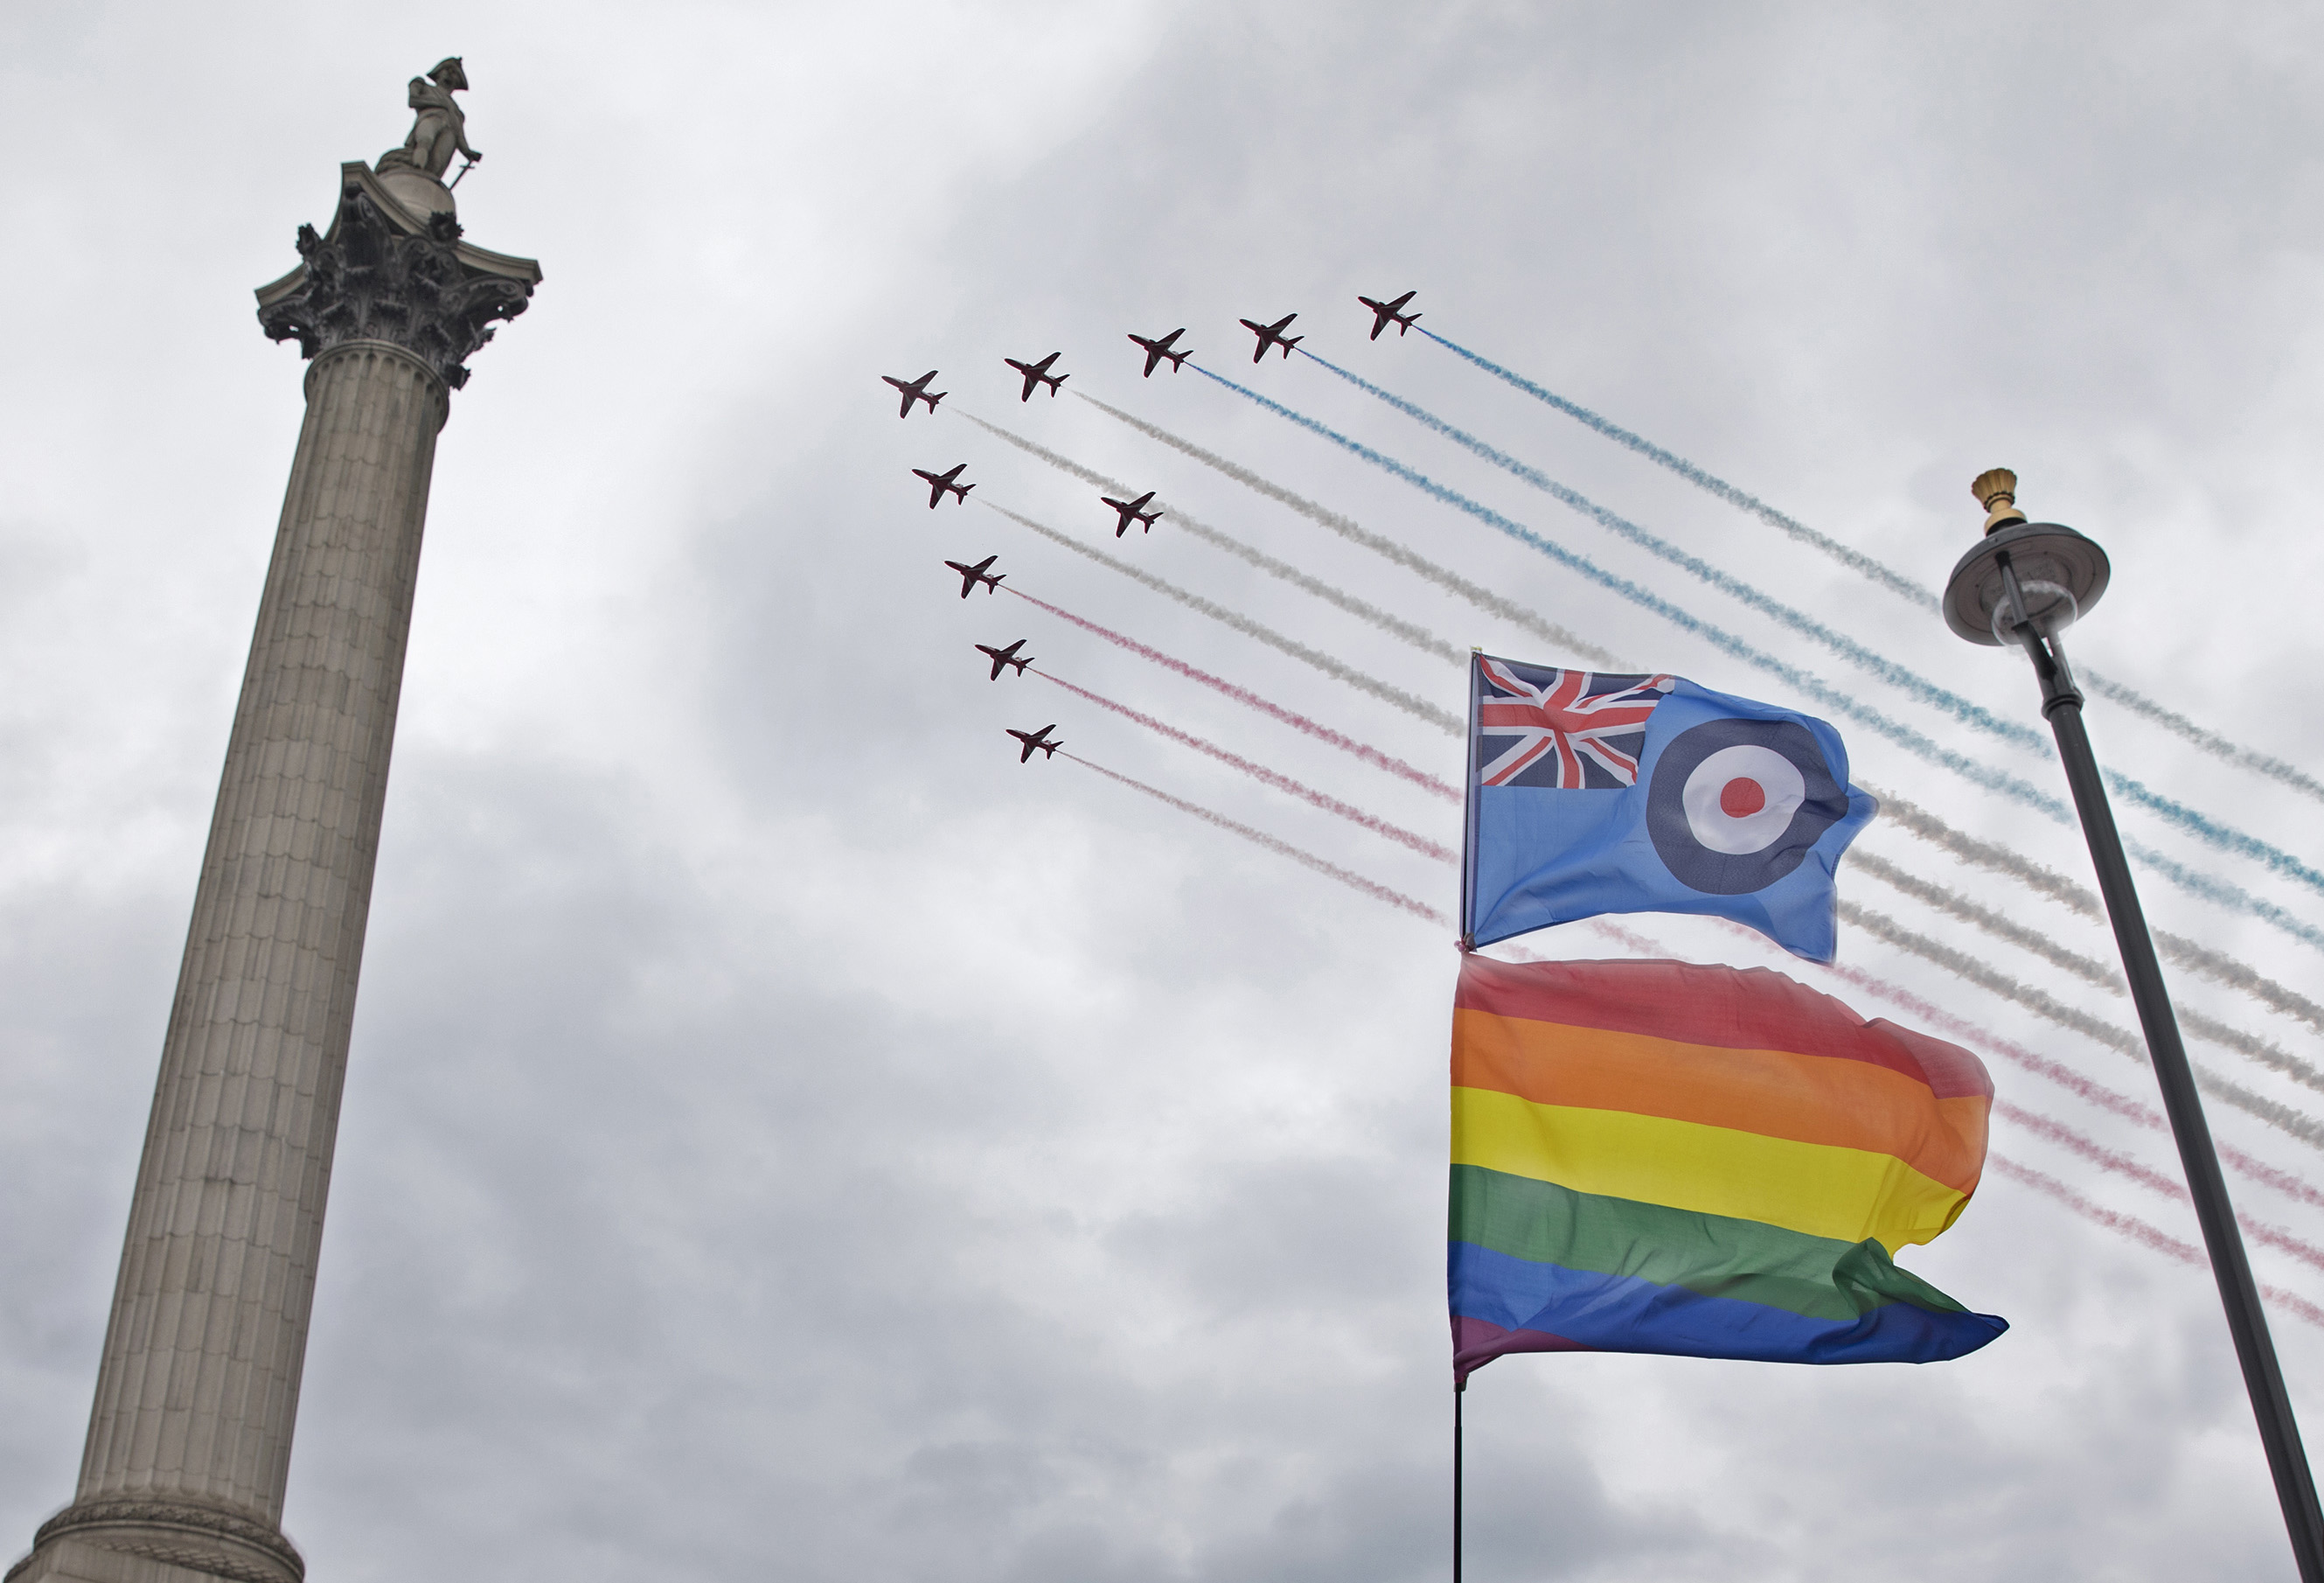 Red Arrows in formation over Nelson's Column and a LGBT rainbow flag.